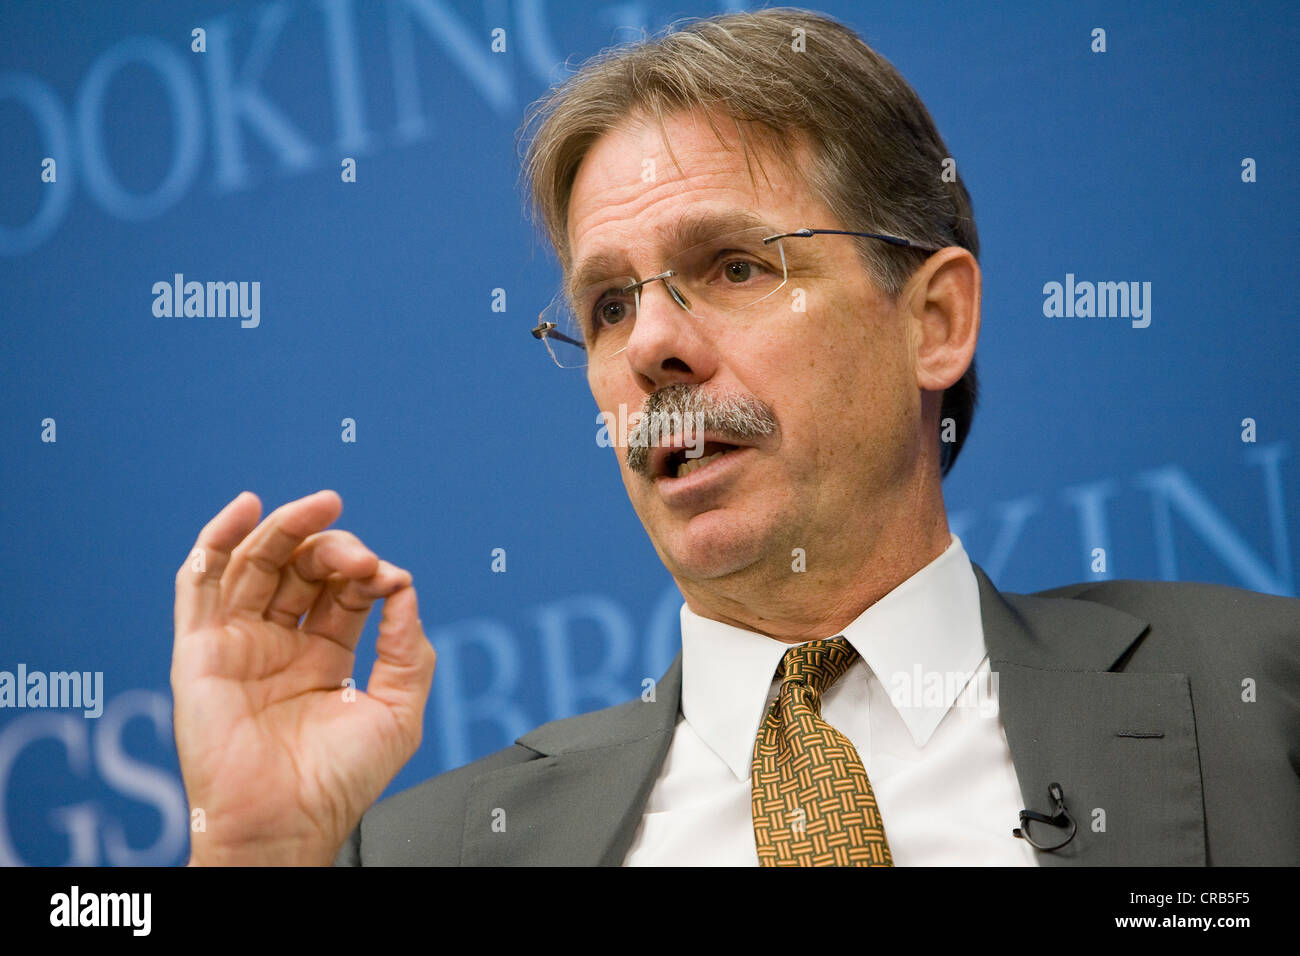 Glenn Hutchins co-founder of the technology investment firm Silver Lake. Stock Photo